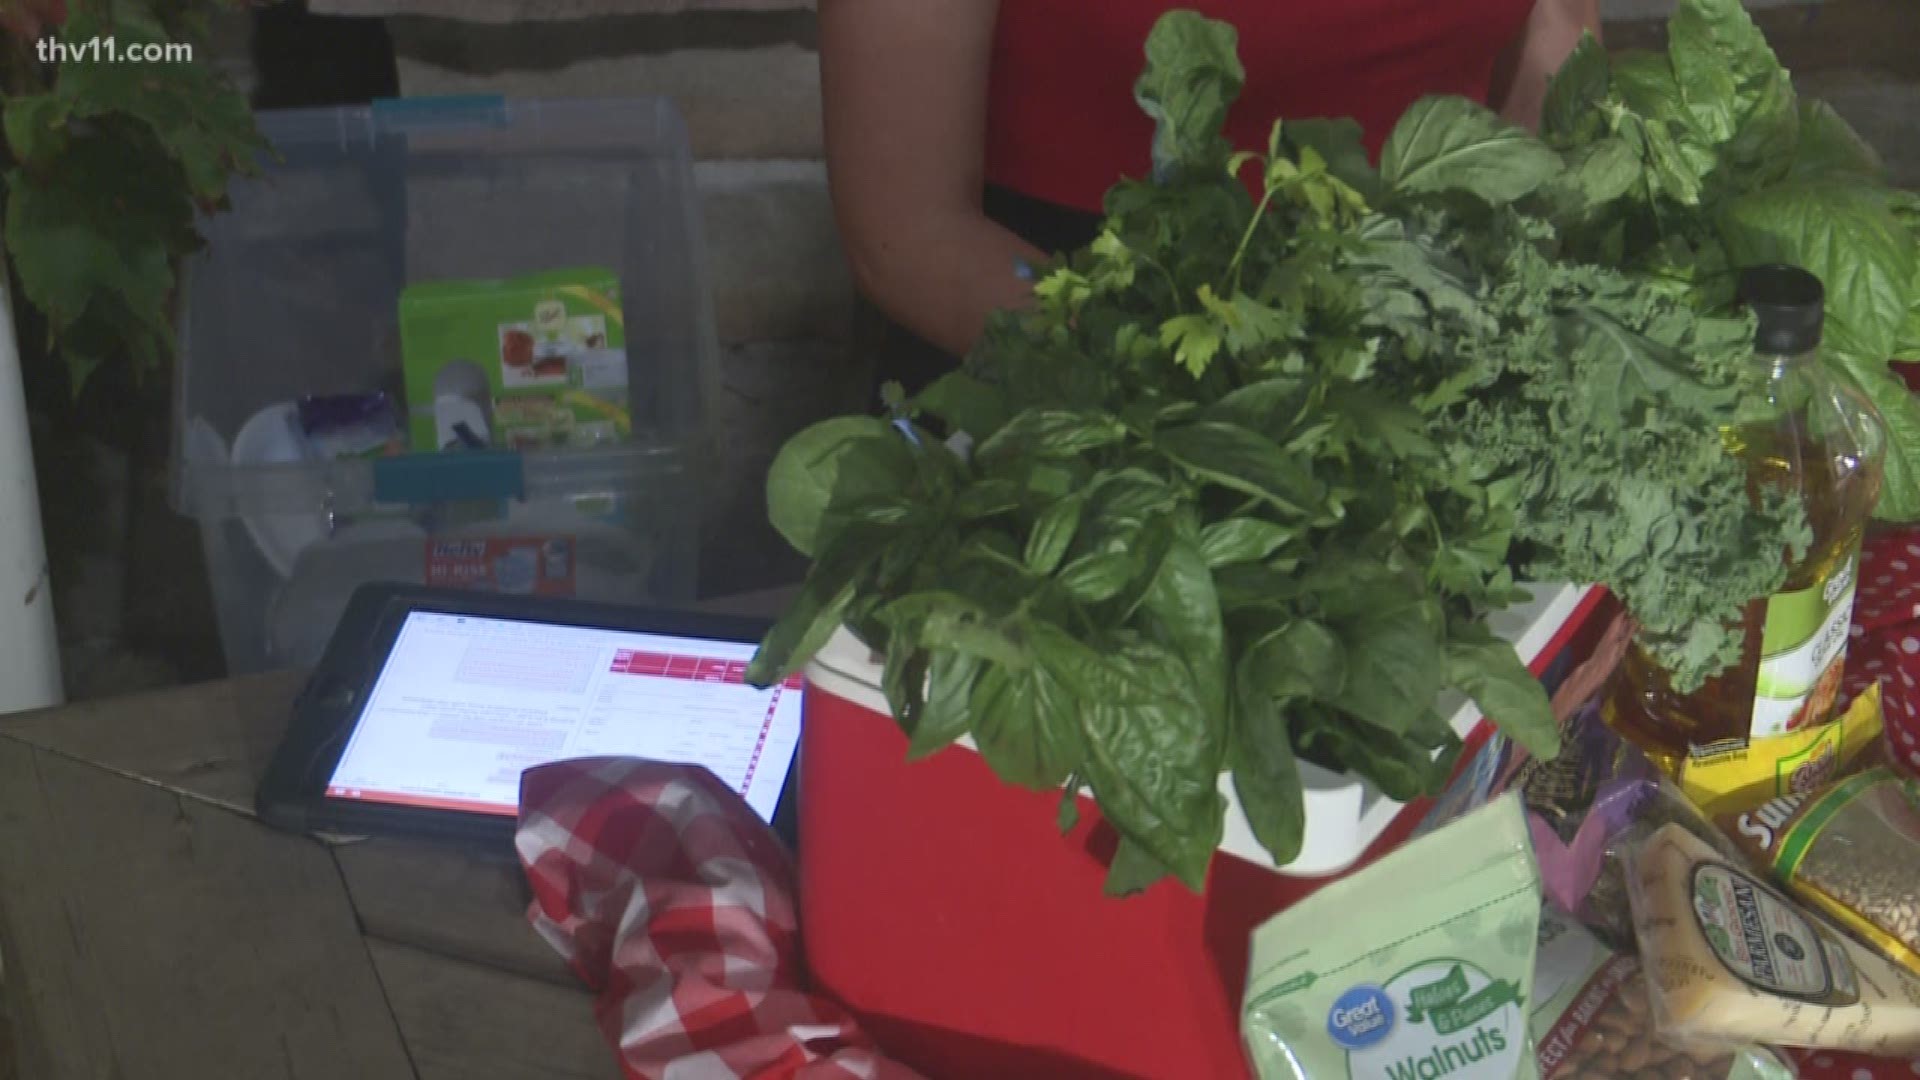 Debbie makes a basic basil pesto and talks about ways to preserve it for later use.